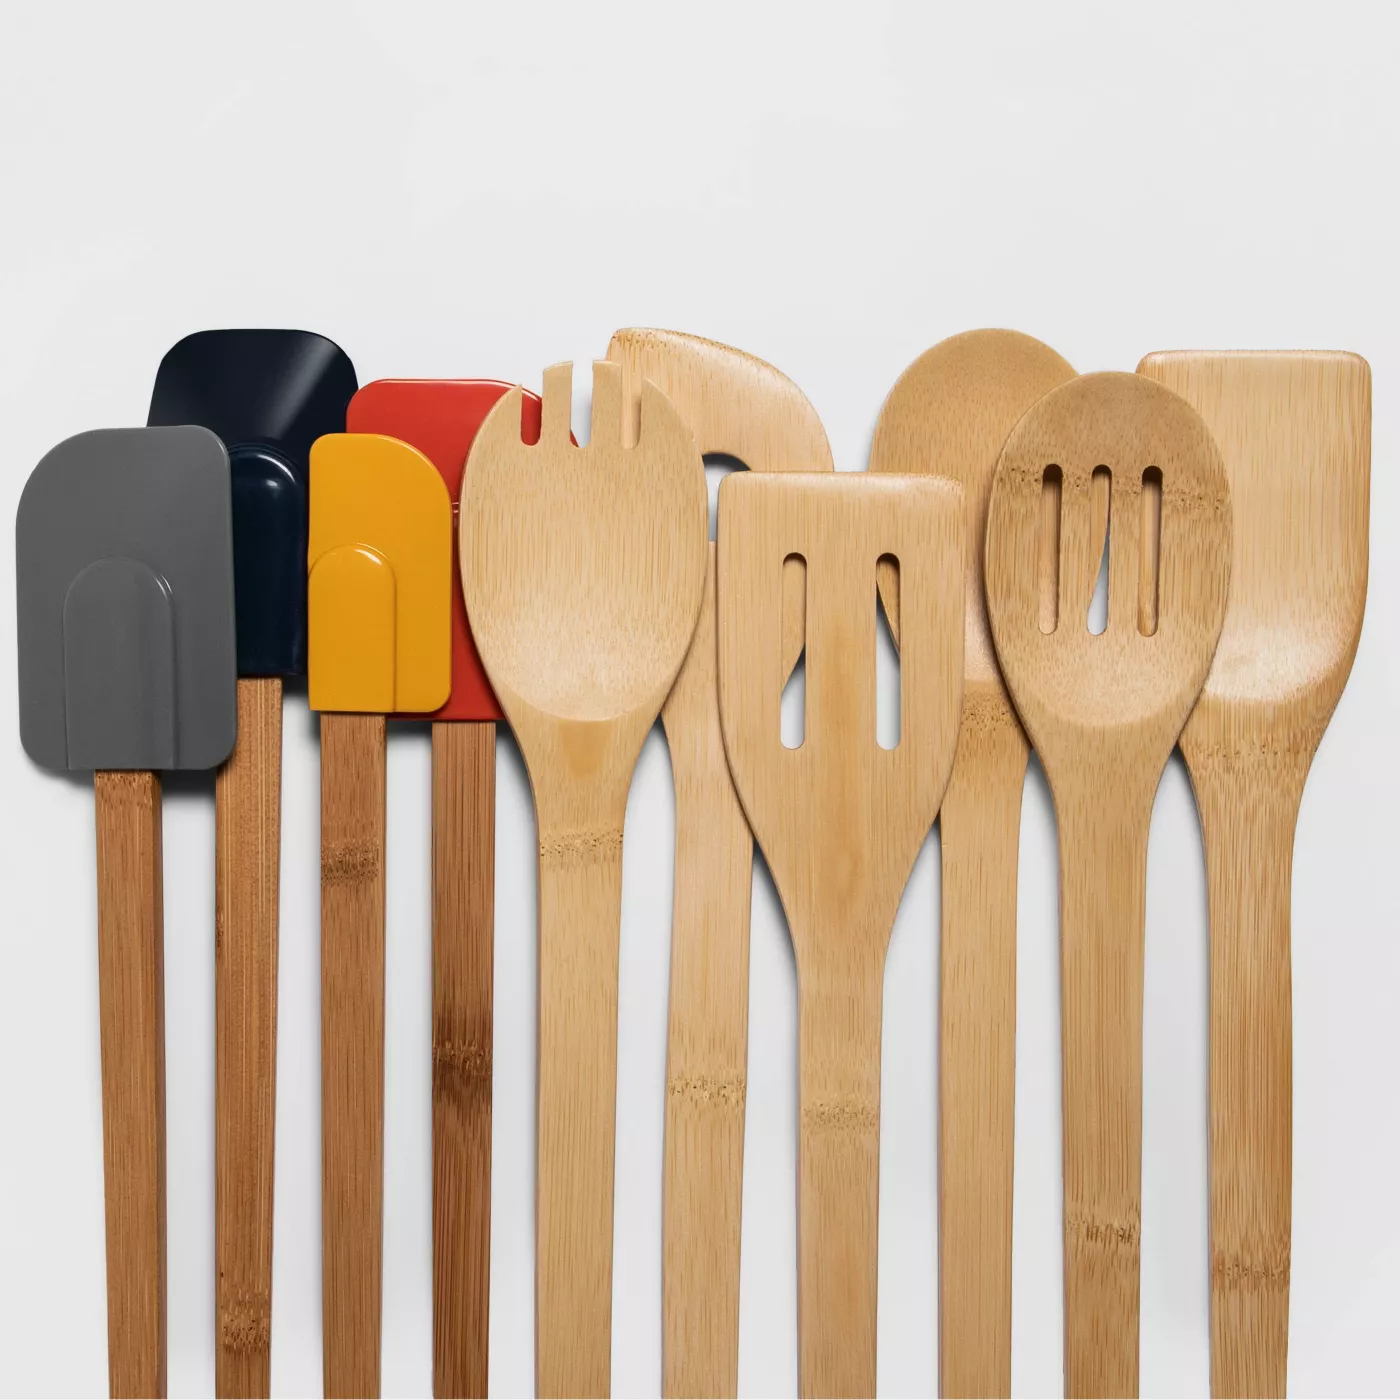 10pc Wood and Silicone Tool Set - Room Essentials™ - image 2 of 3